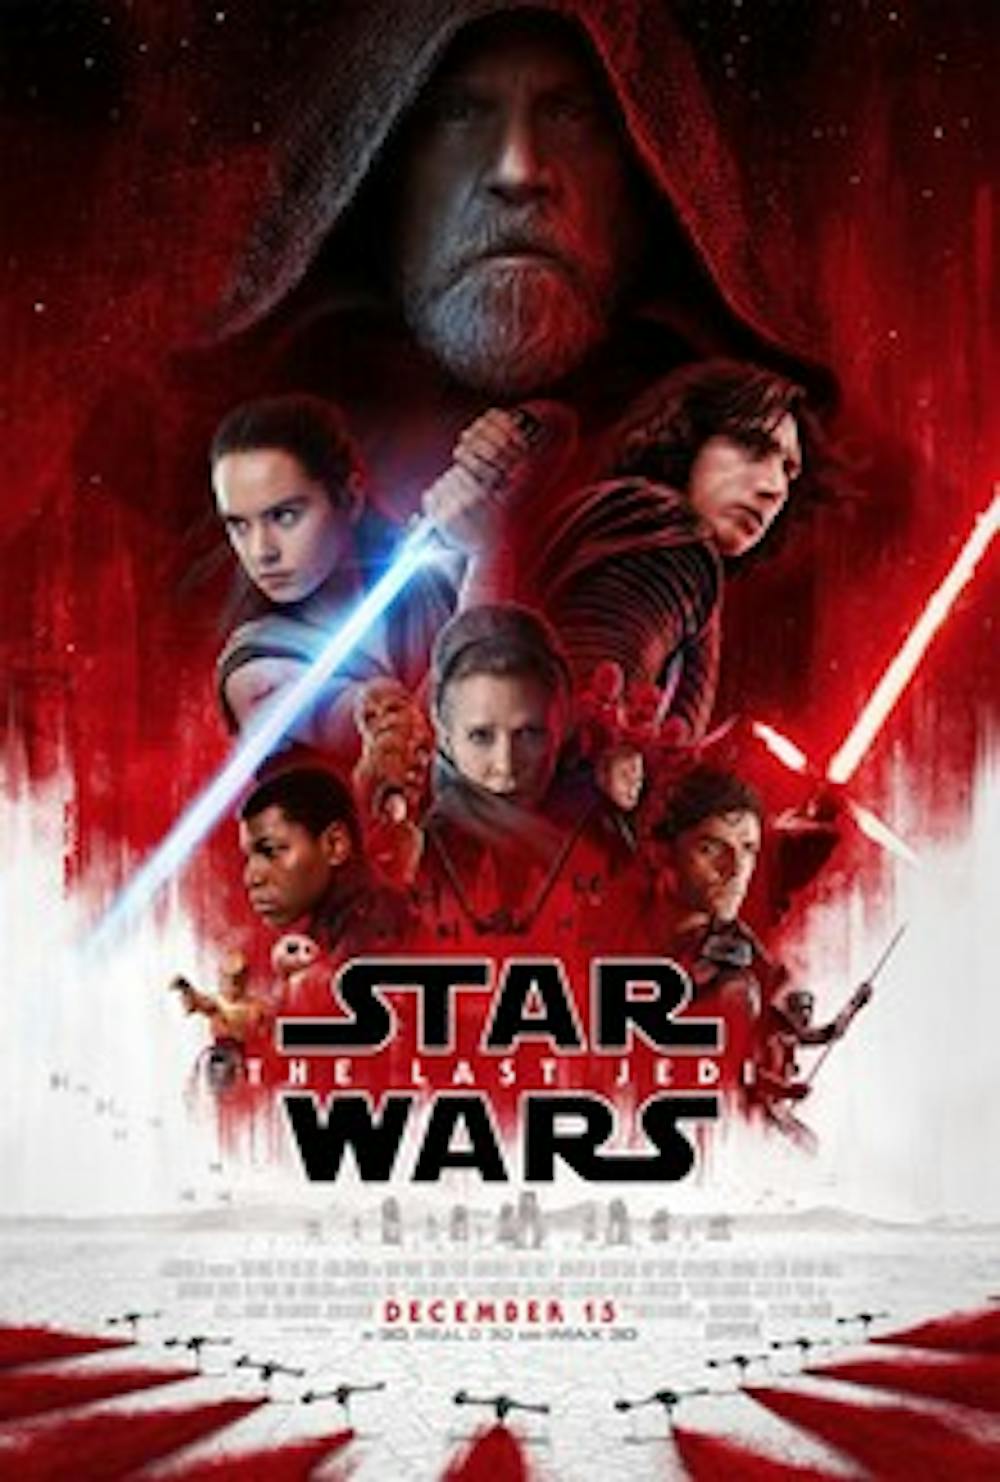 <p>Director Rian Johnson’s choices may seem anticlimactic, but they underline the film’s wondrous and arguably radical willingness to question the definition of heroism and reckon with “Star Wars’” mythic foundations.</p>